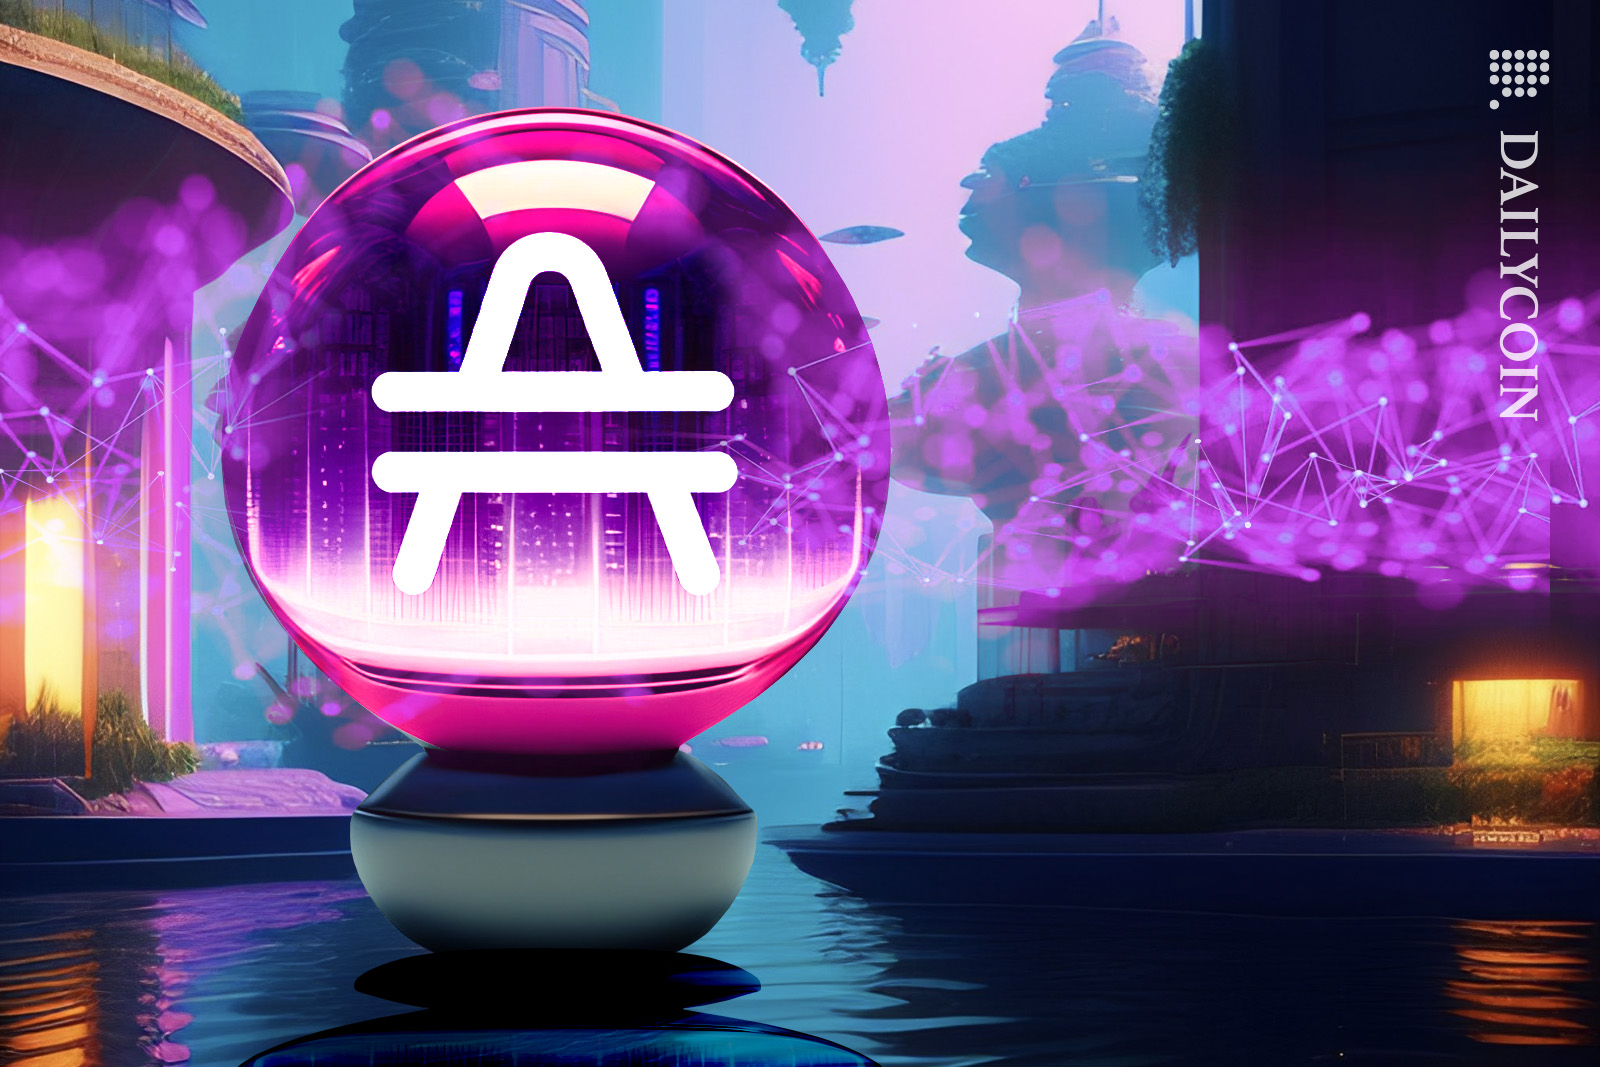 Mysterious pink sphere floating on water in a futuristic city scape with an AMP logo on it.